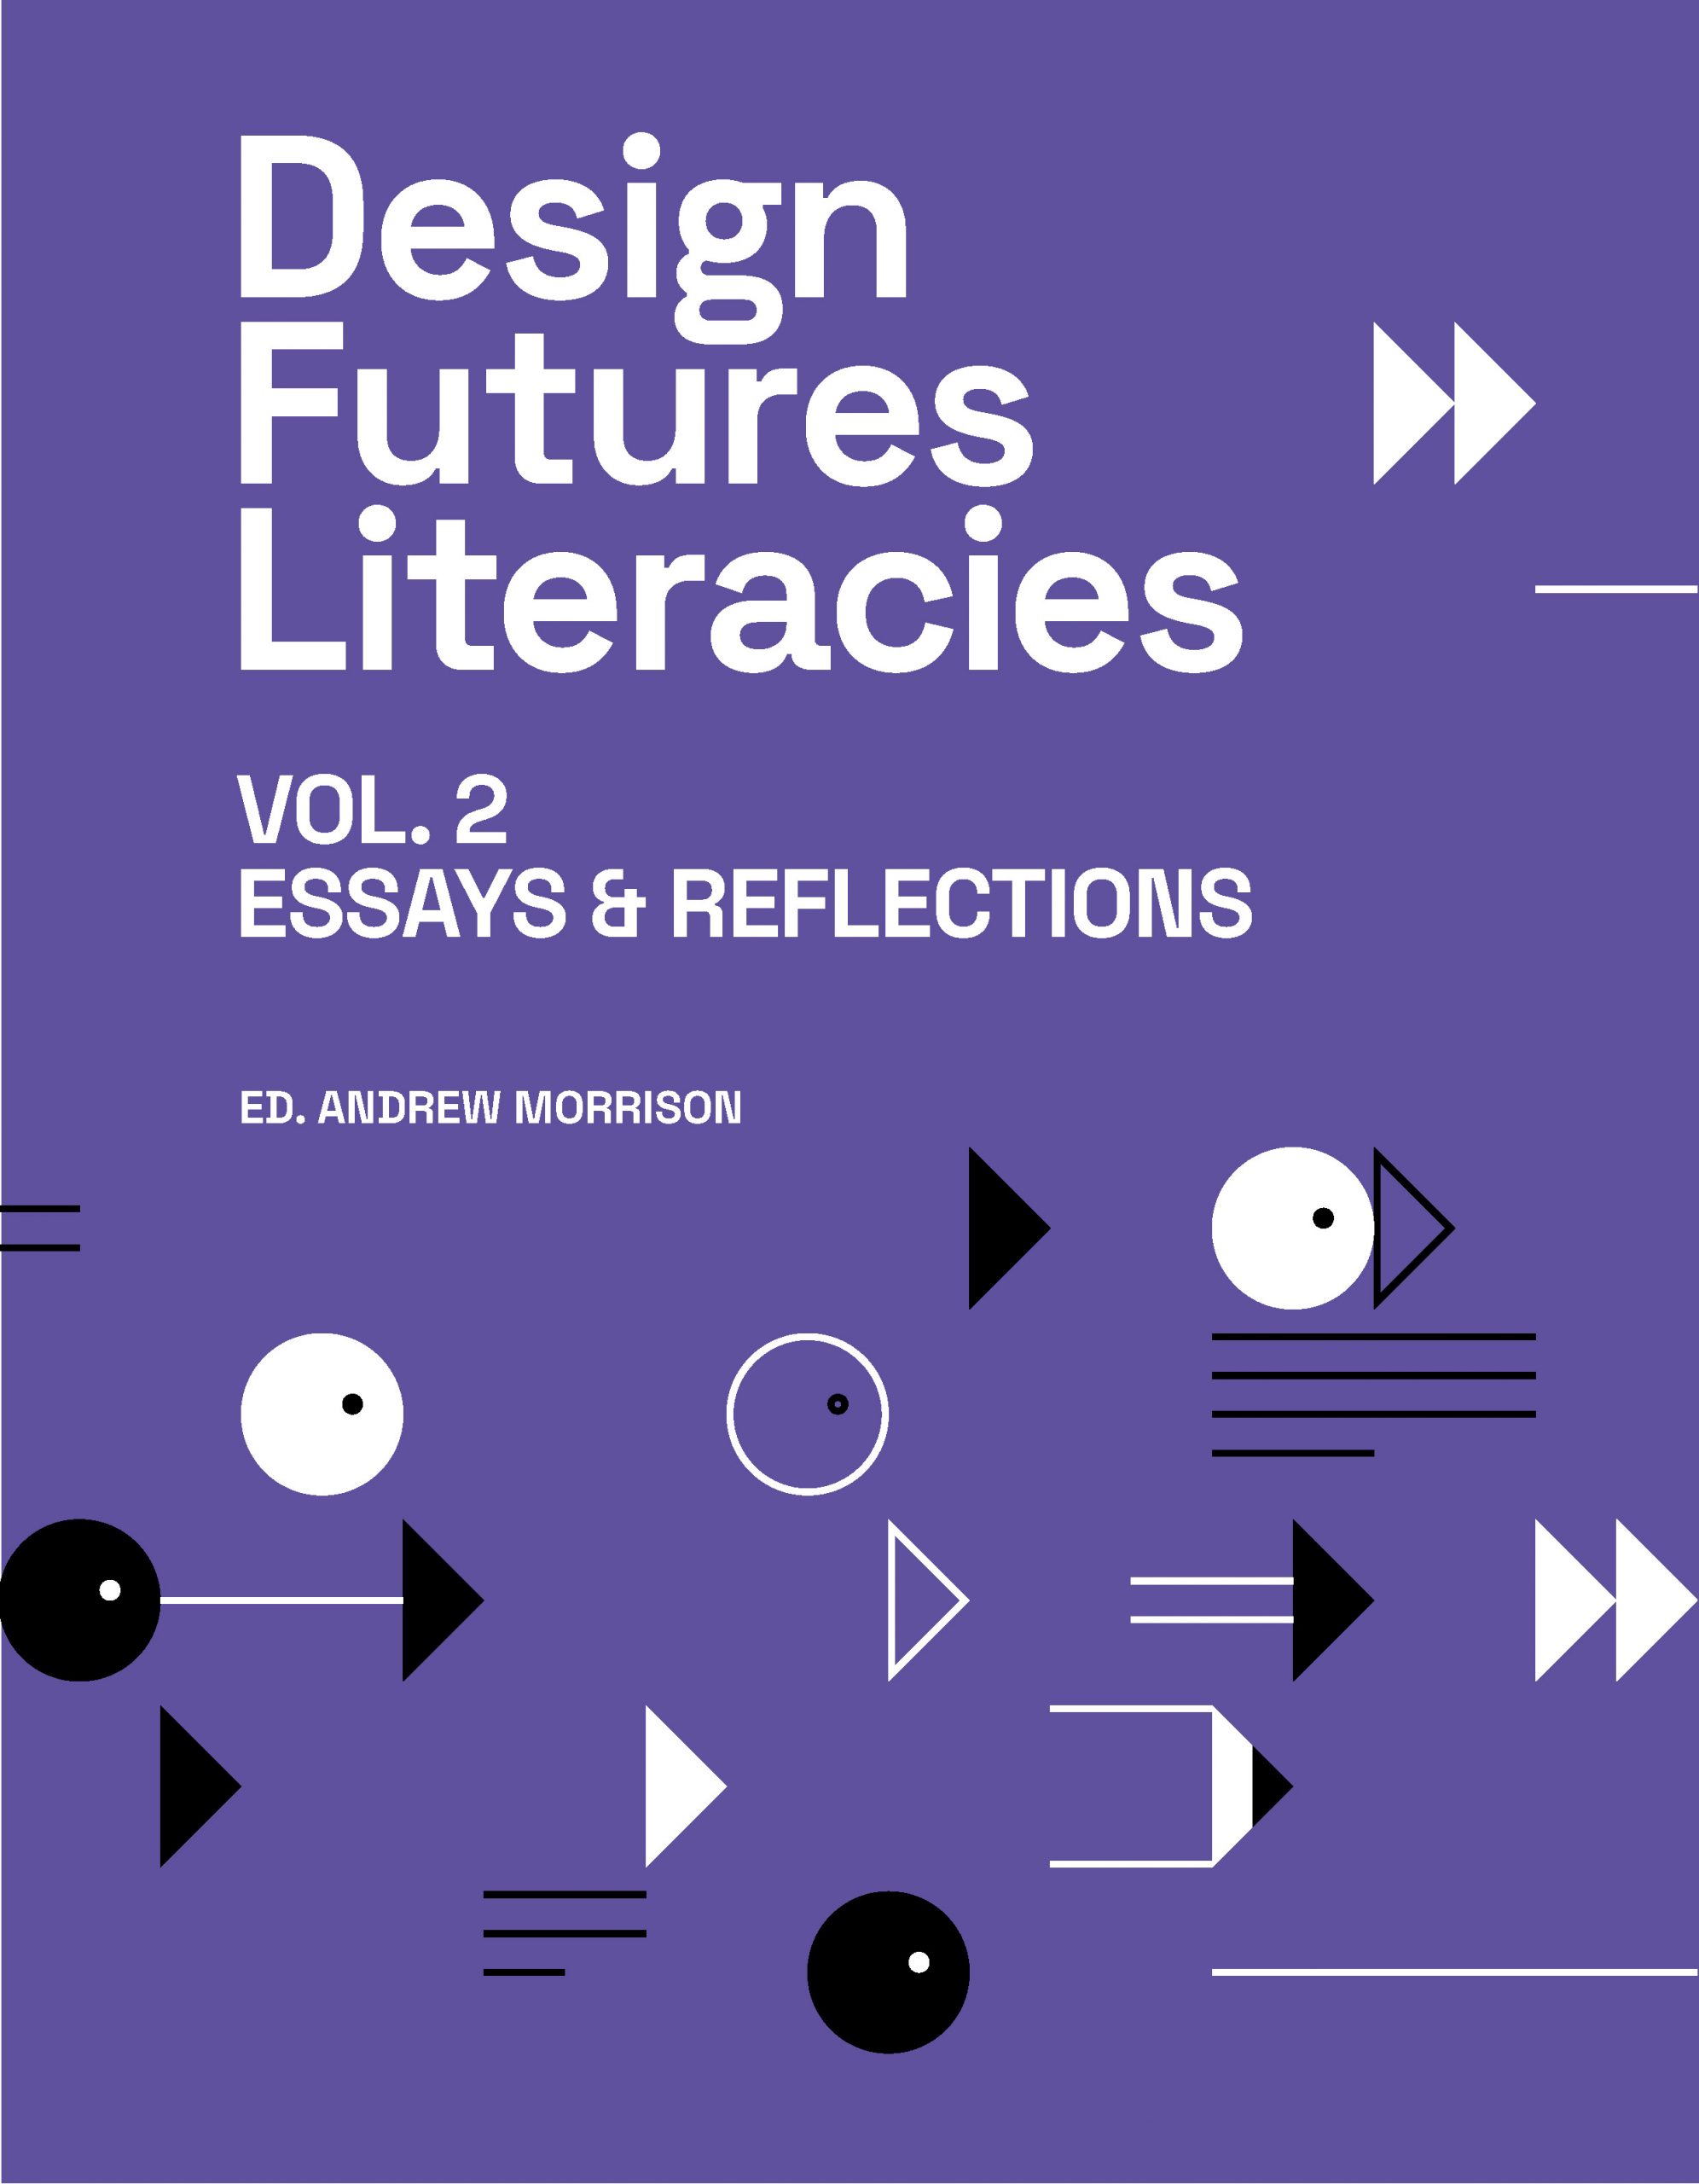 Cover of Design Futures Literacies Volume 2, entitled "Essays and Reflections"